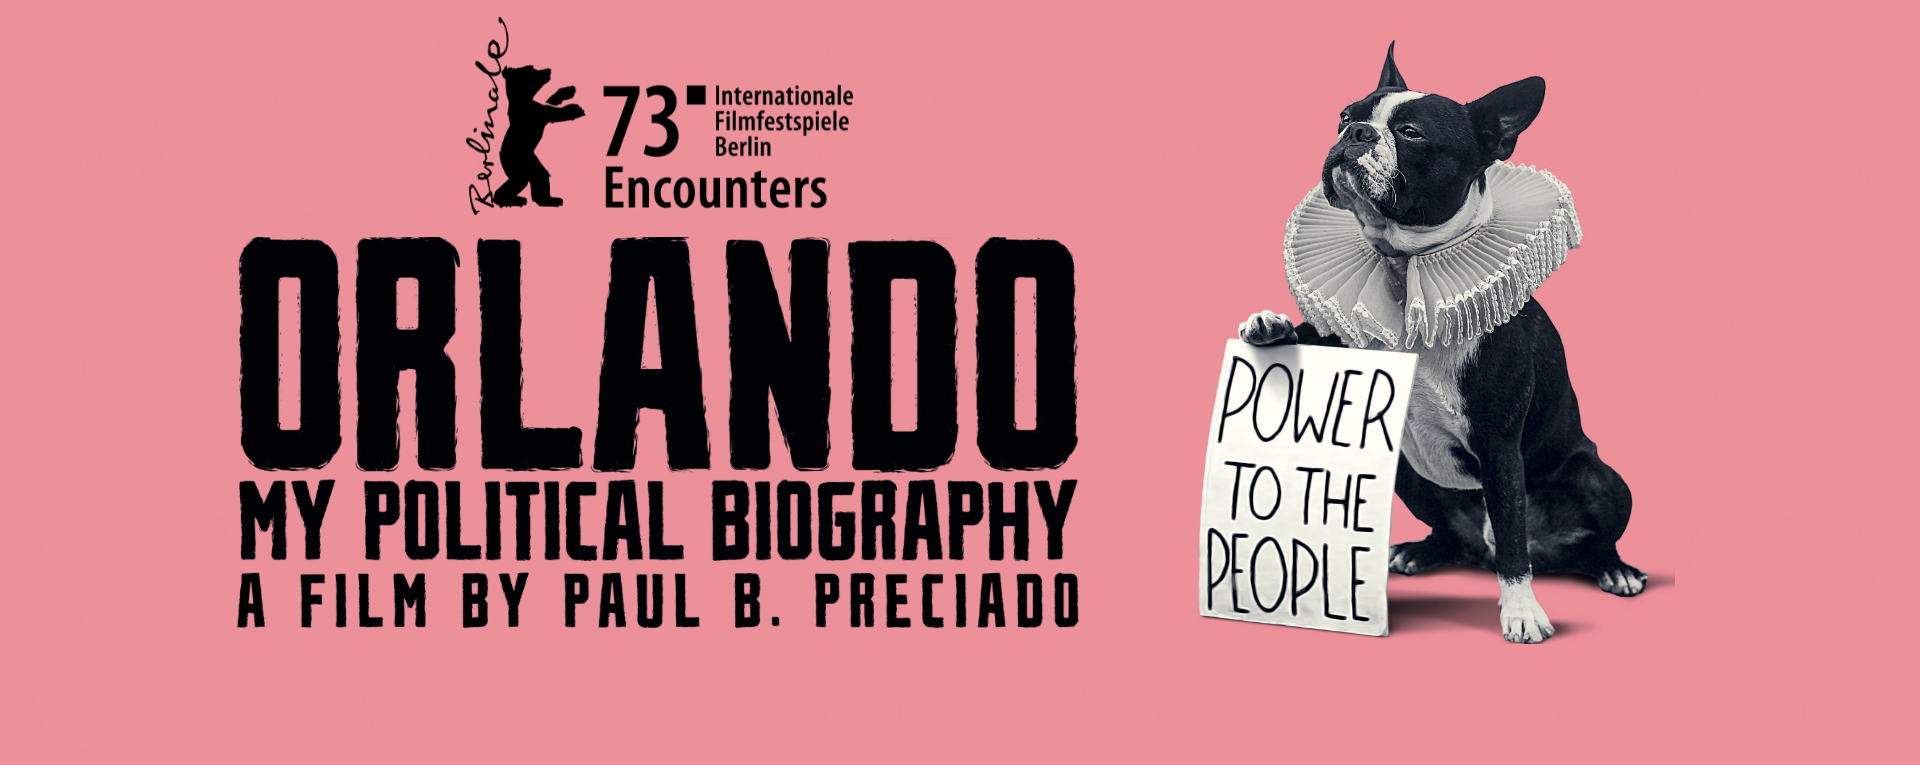 New Acquisition ORLANDO, MY POLITICAL BIOGRAPHY will have its World Premiere in the Encounters Section of the Berlinale 2023